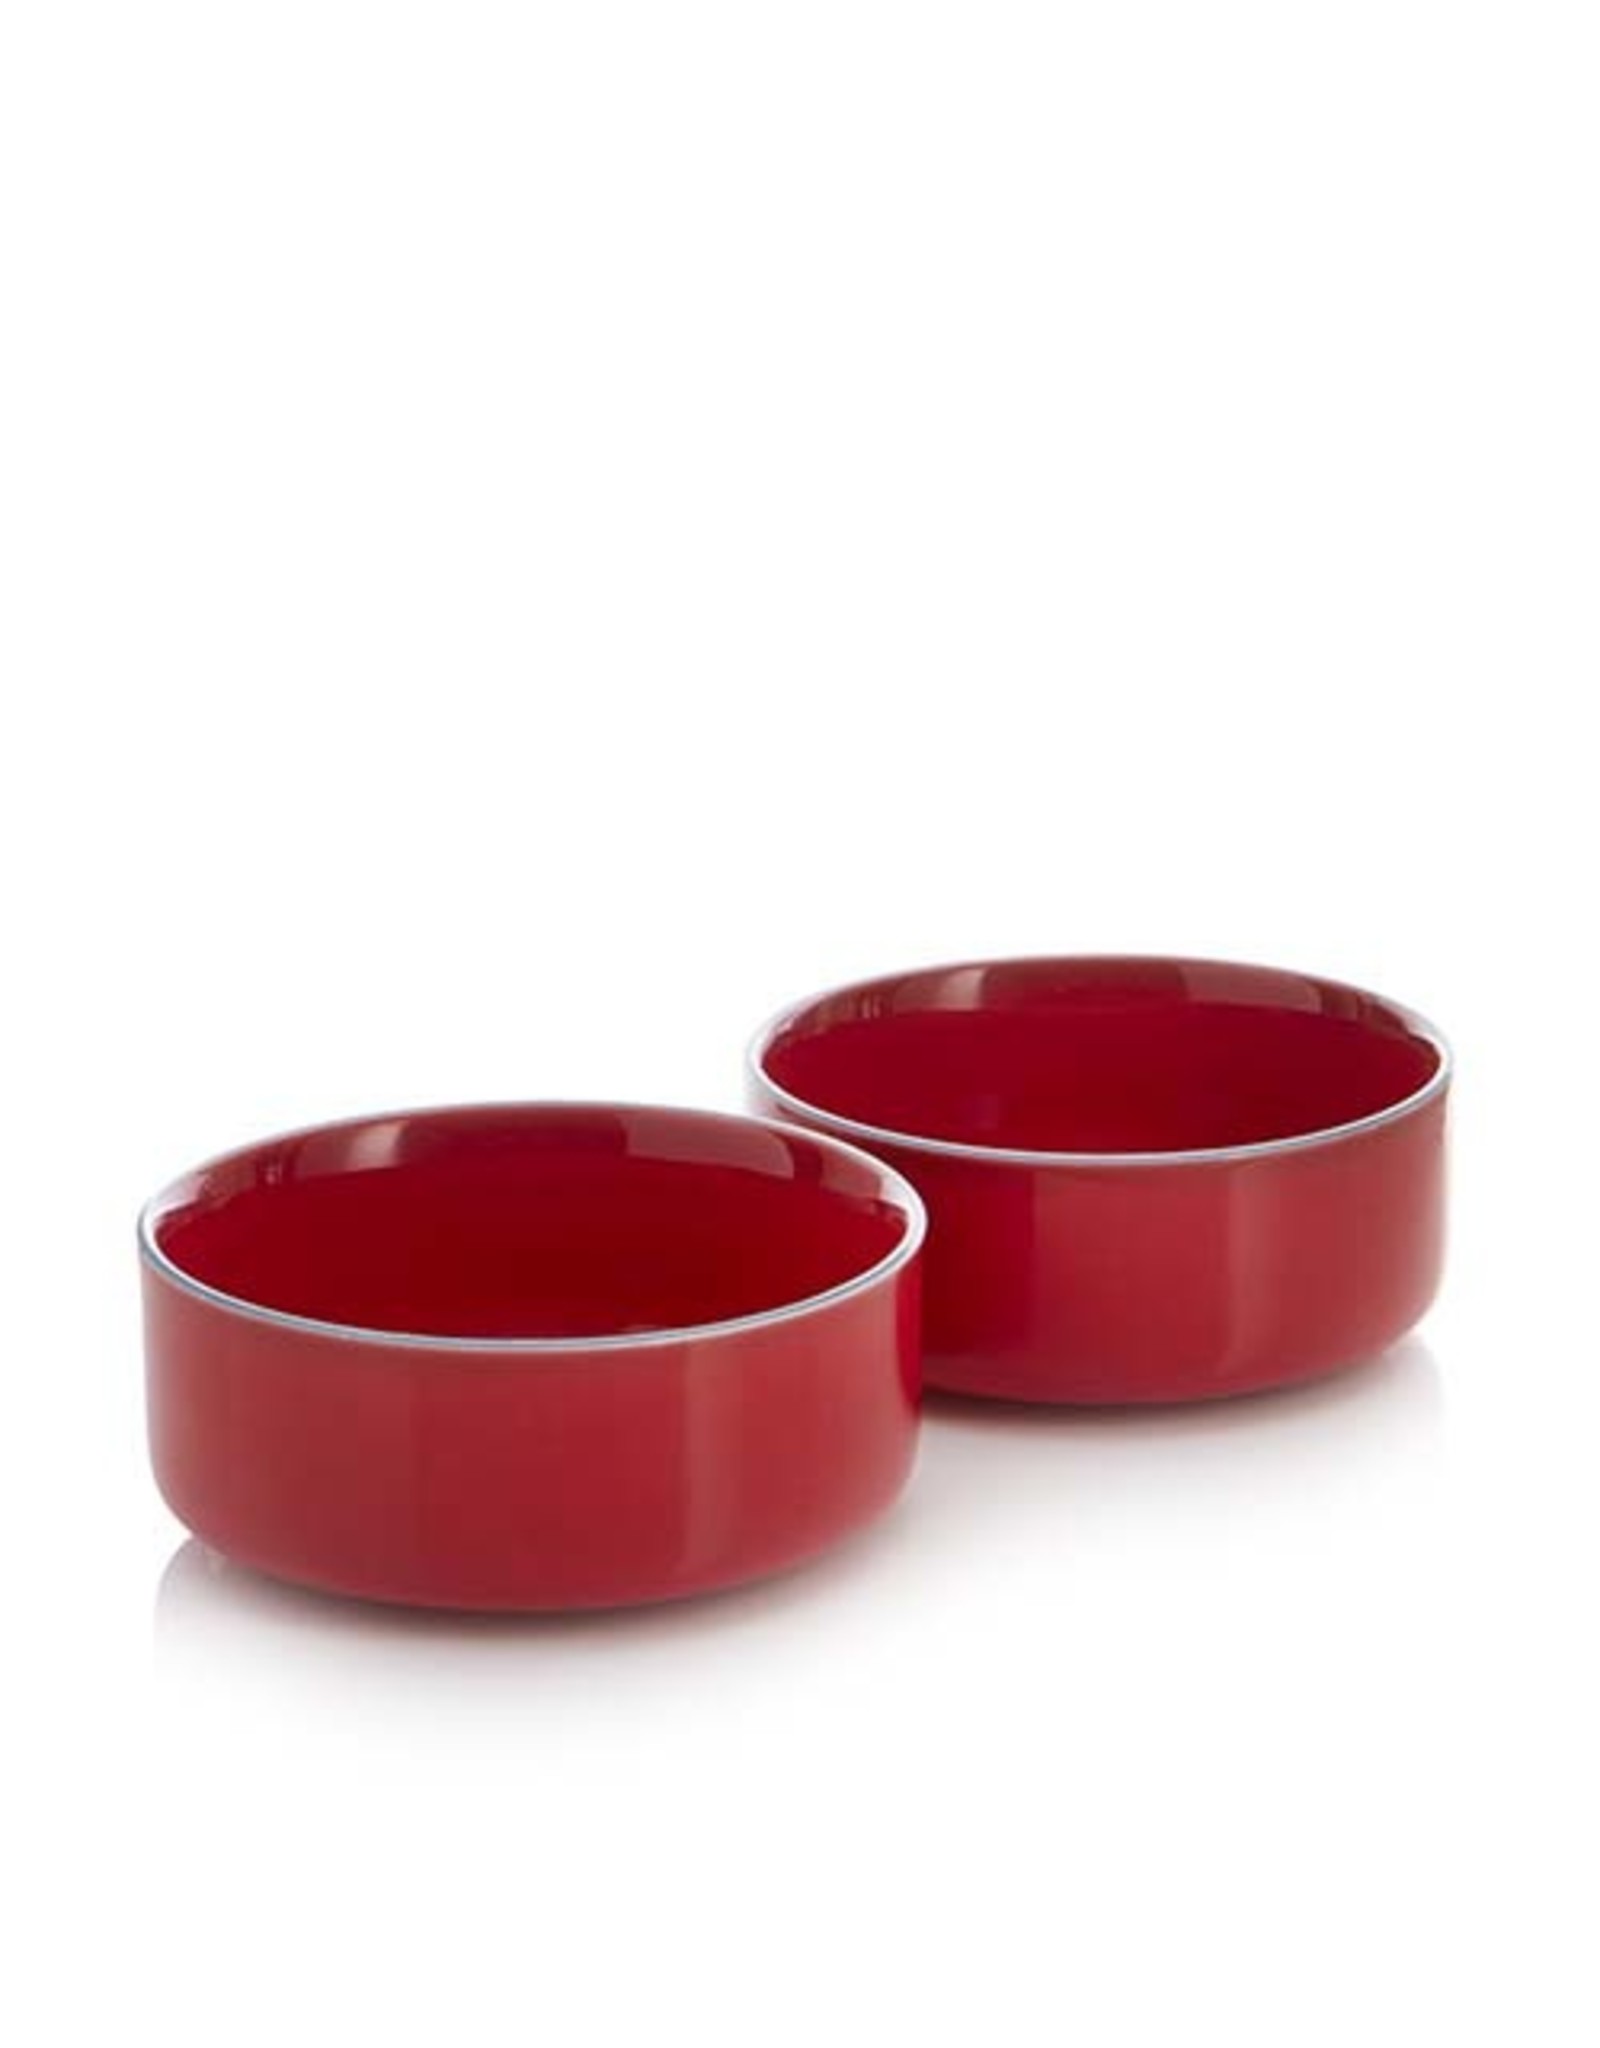 Red Song Cai Ice Cream Bowls